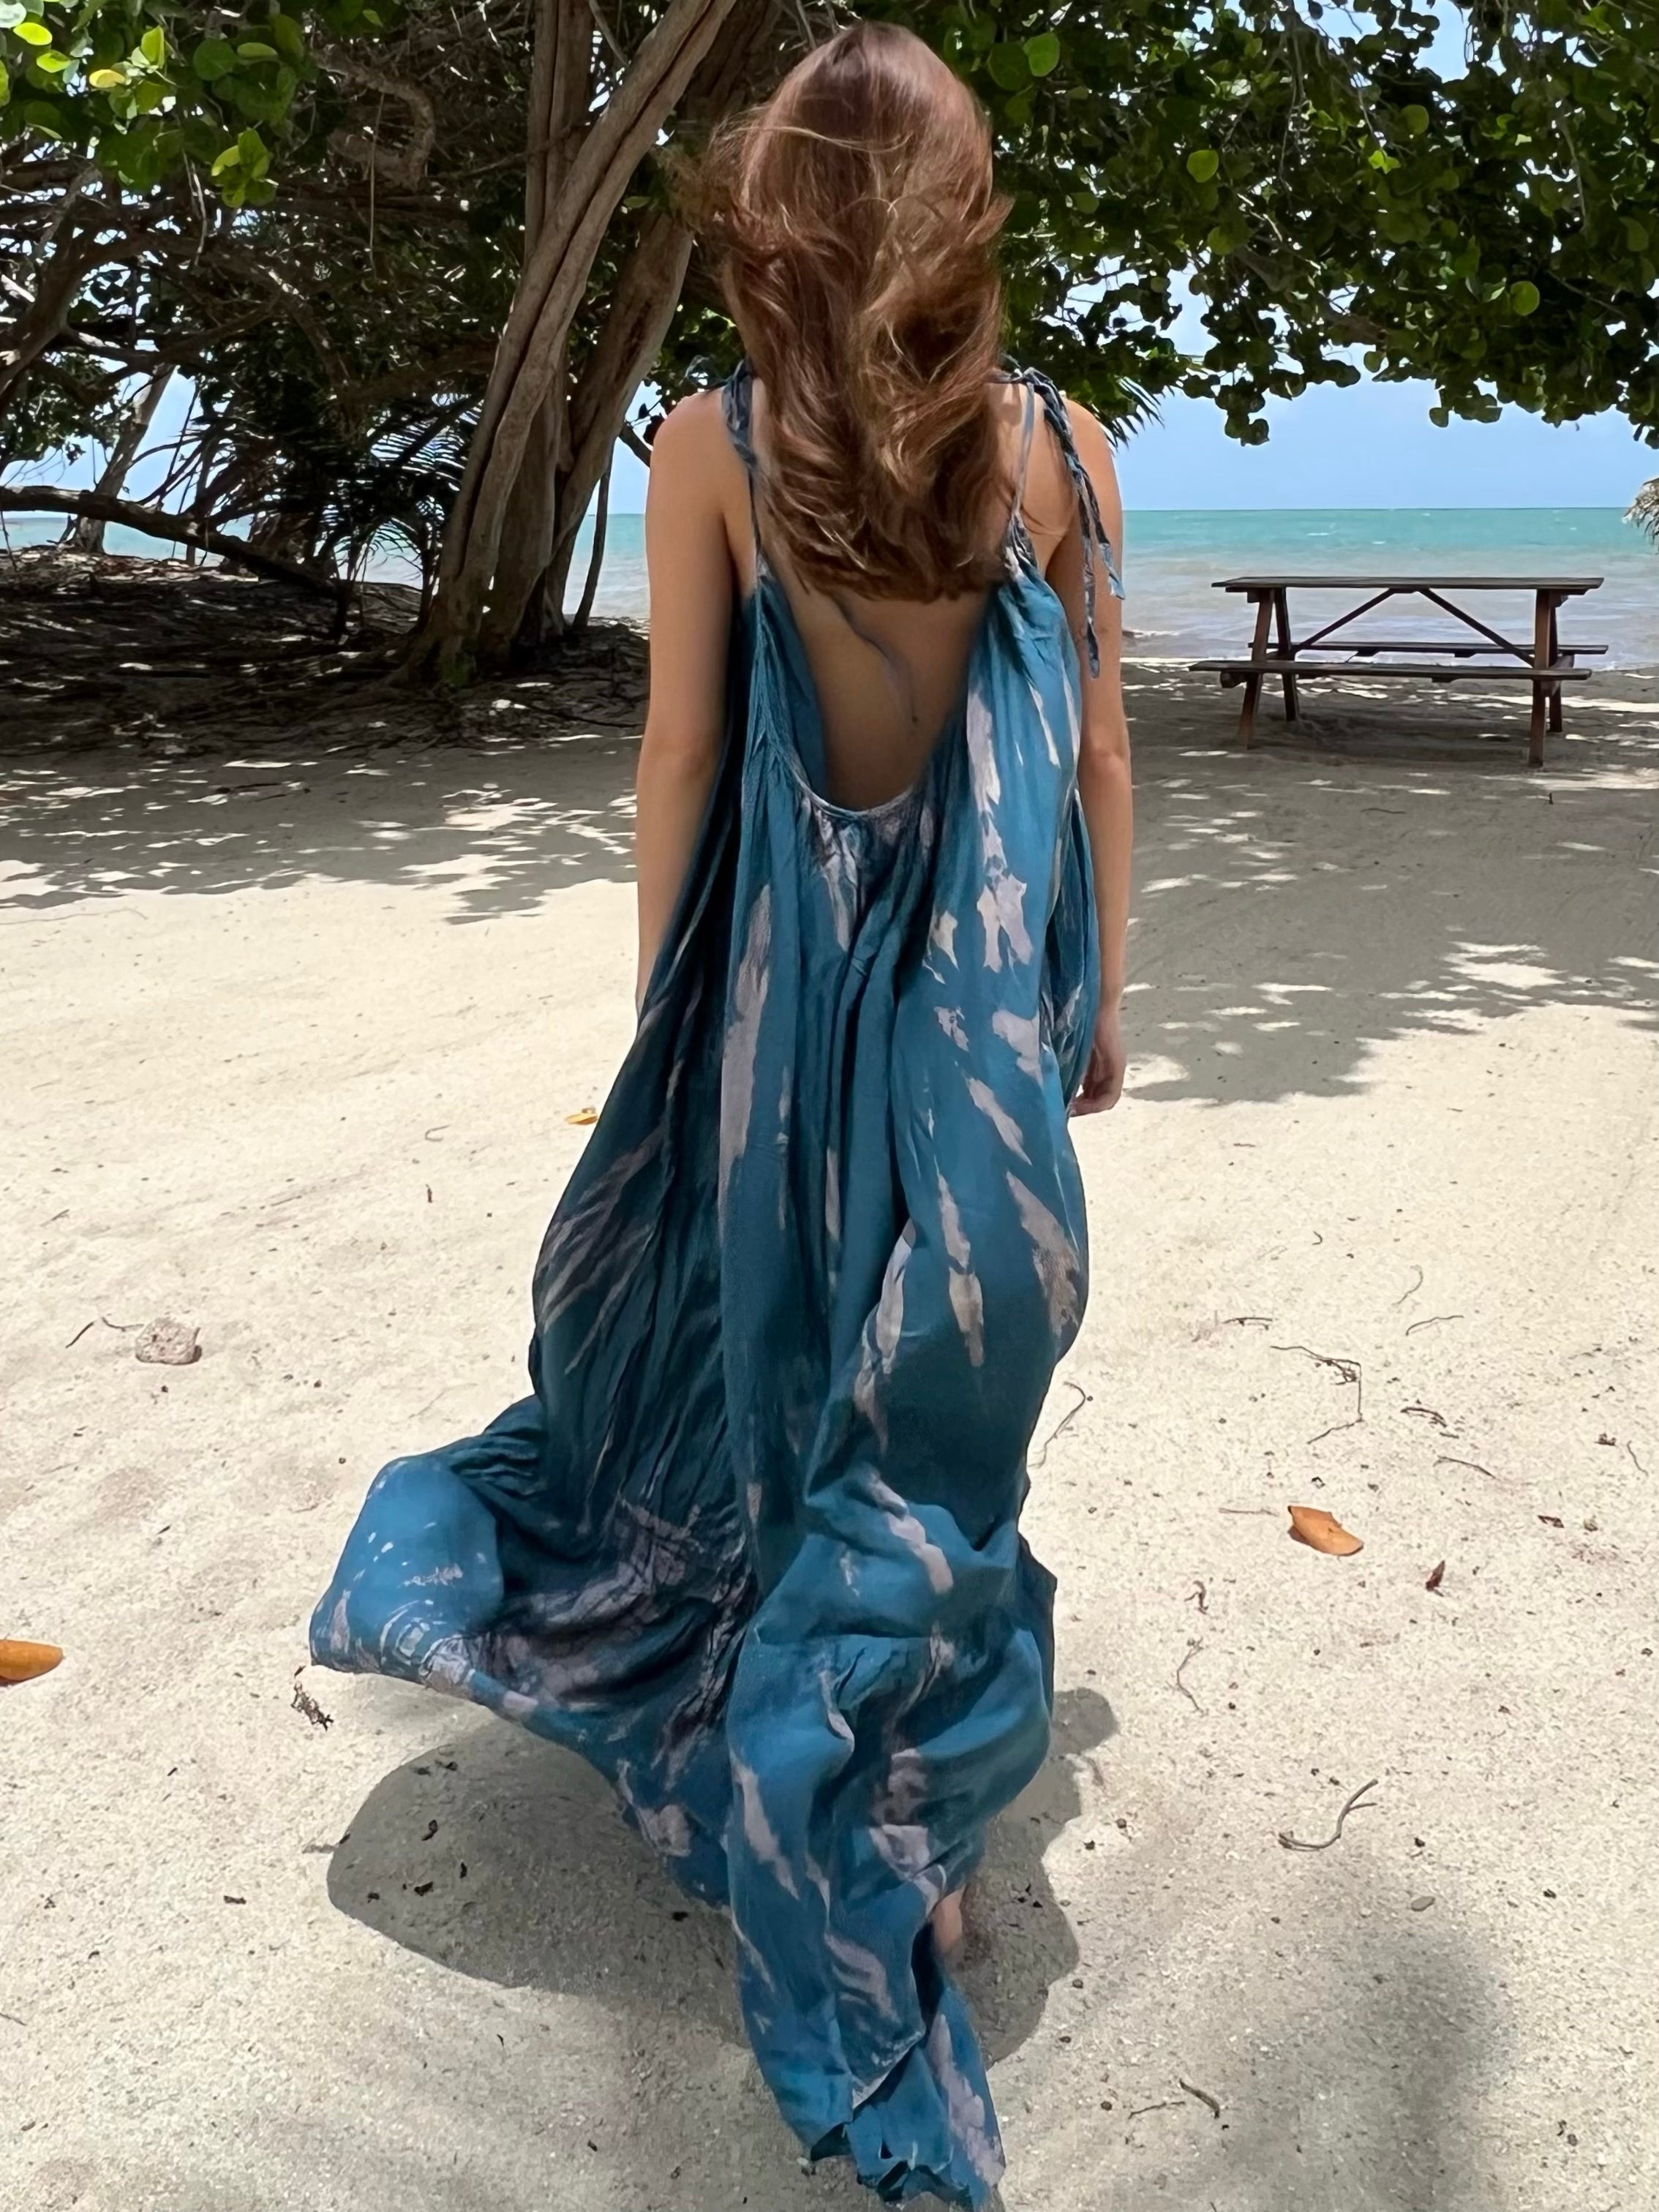 Shop  Boho Teal Tie dye Backless Maxi Dress - Opened maxi Dress in Teal at Coco De Chom for next vacation now